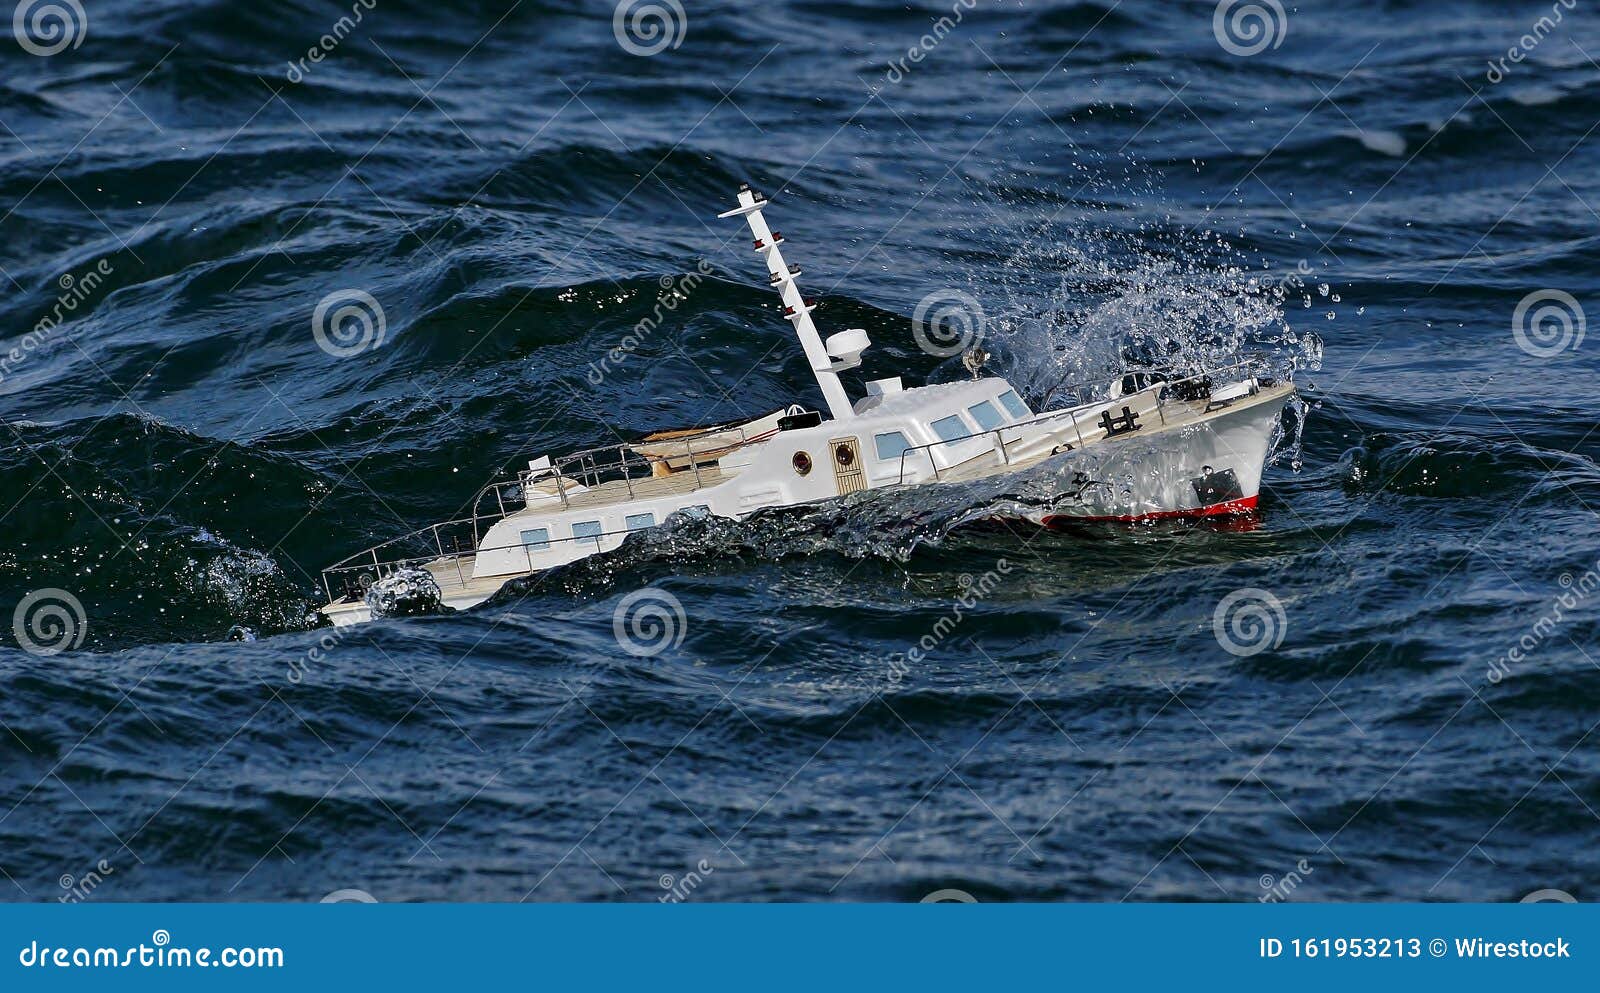 Remote Control Boat Int he Water Hitting the Waves Stock Image - Image of  people, care: 161953213